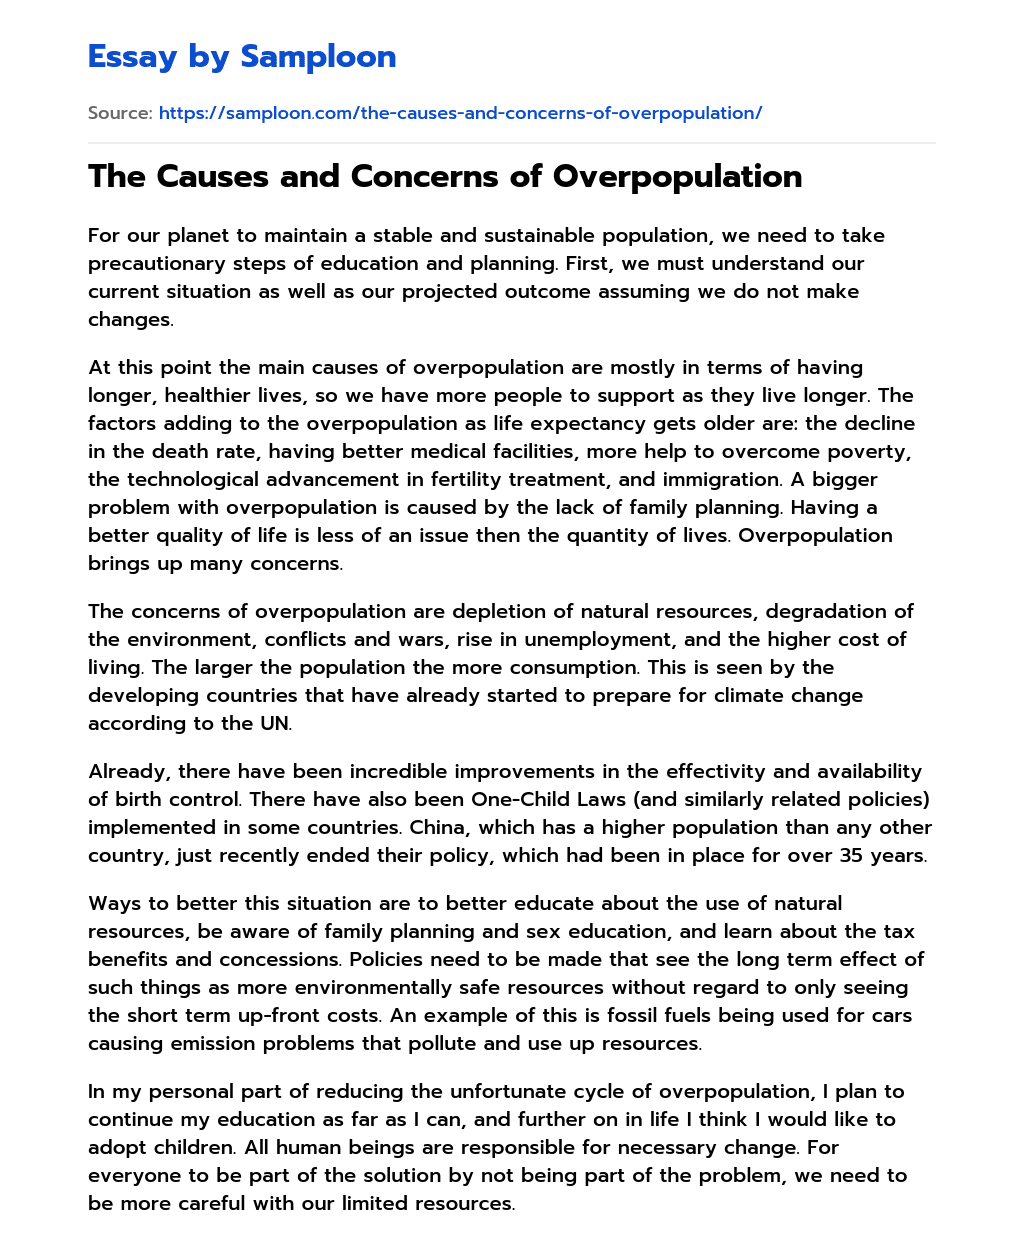 The Causes and Concerns of Overpopulation essay